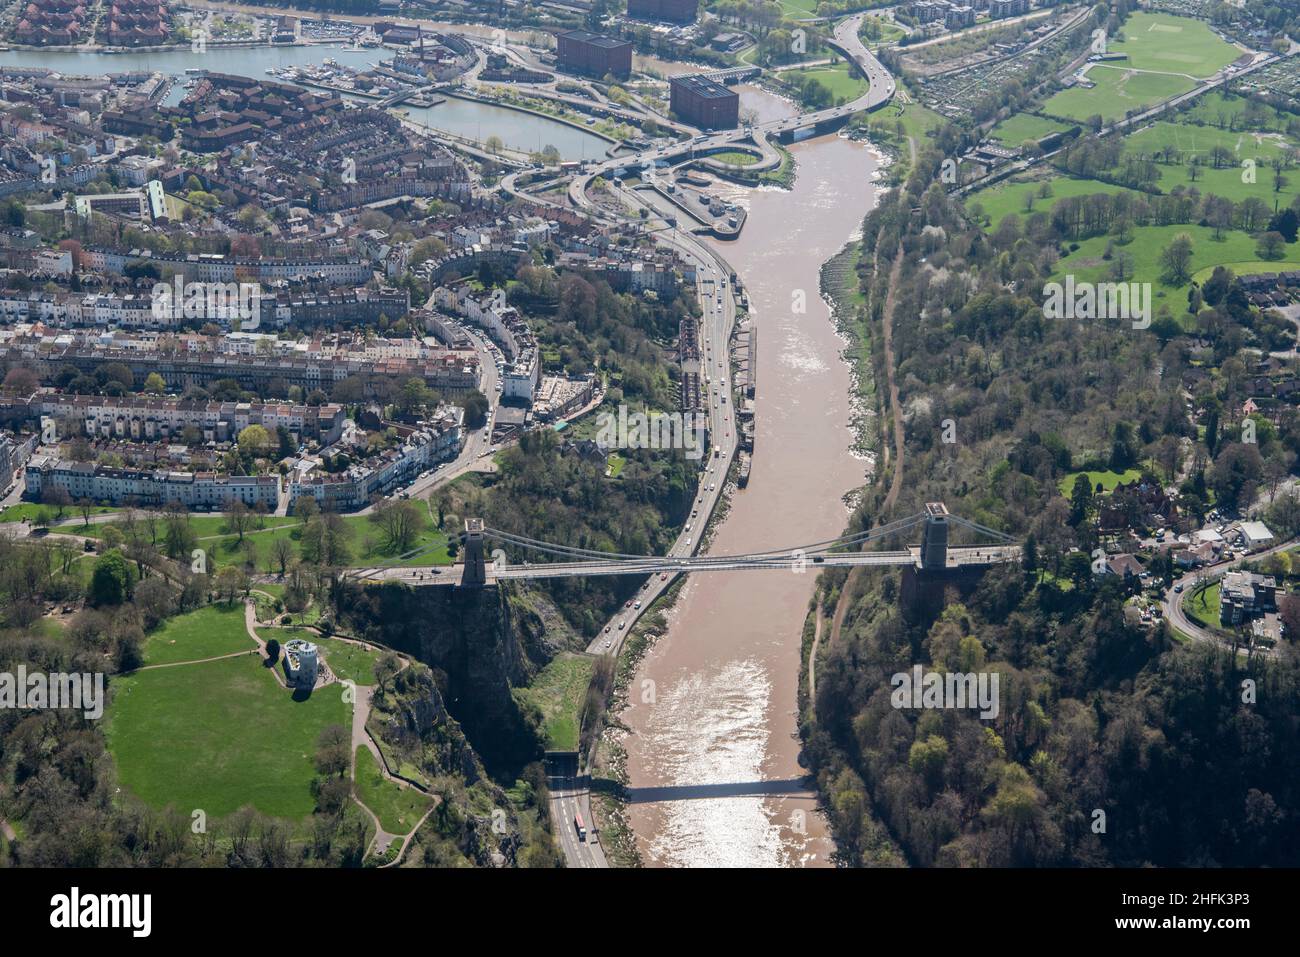 Clifton Suspension Bridge, Bristol, 2018. Aerial view looking south over Clifton and towards the floating harbour. The bridge over the Avon Gorge was designed by &lt; Name not Found! &gt; between 1829 and 1831 but not completed until 1864, after Brunel's death. Stock Photo